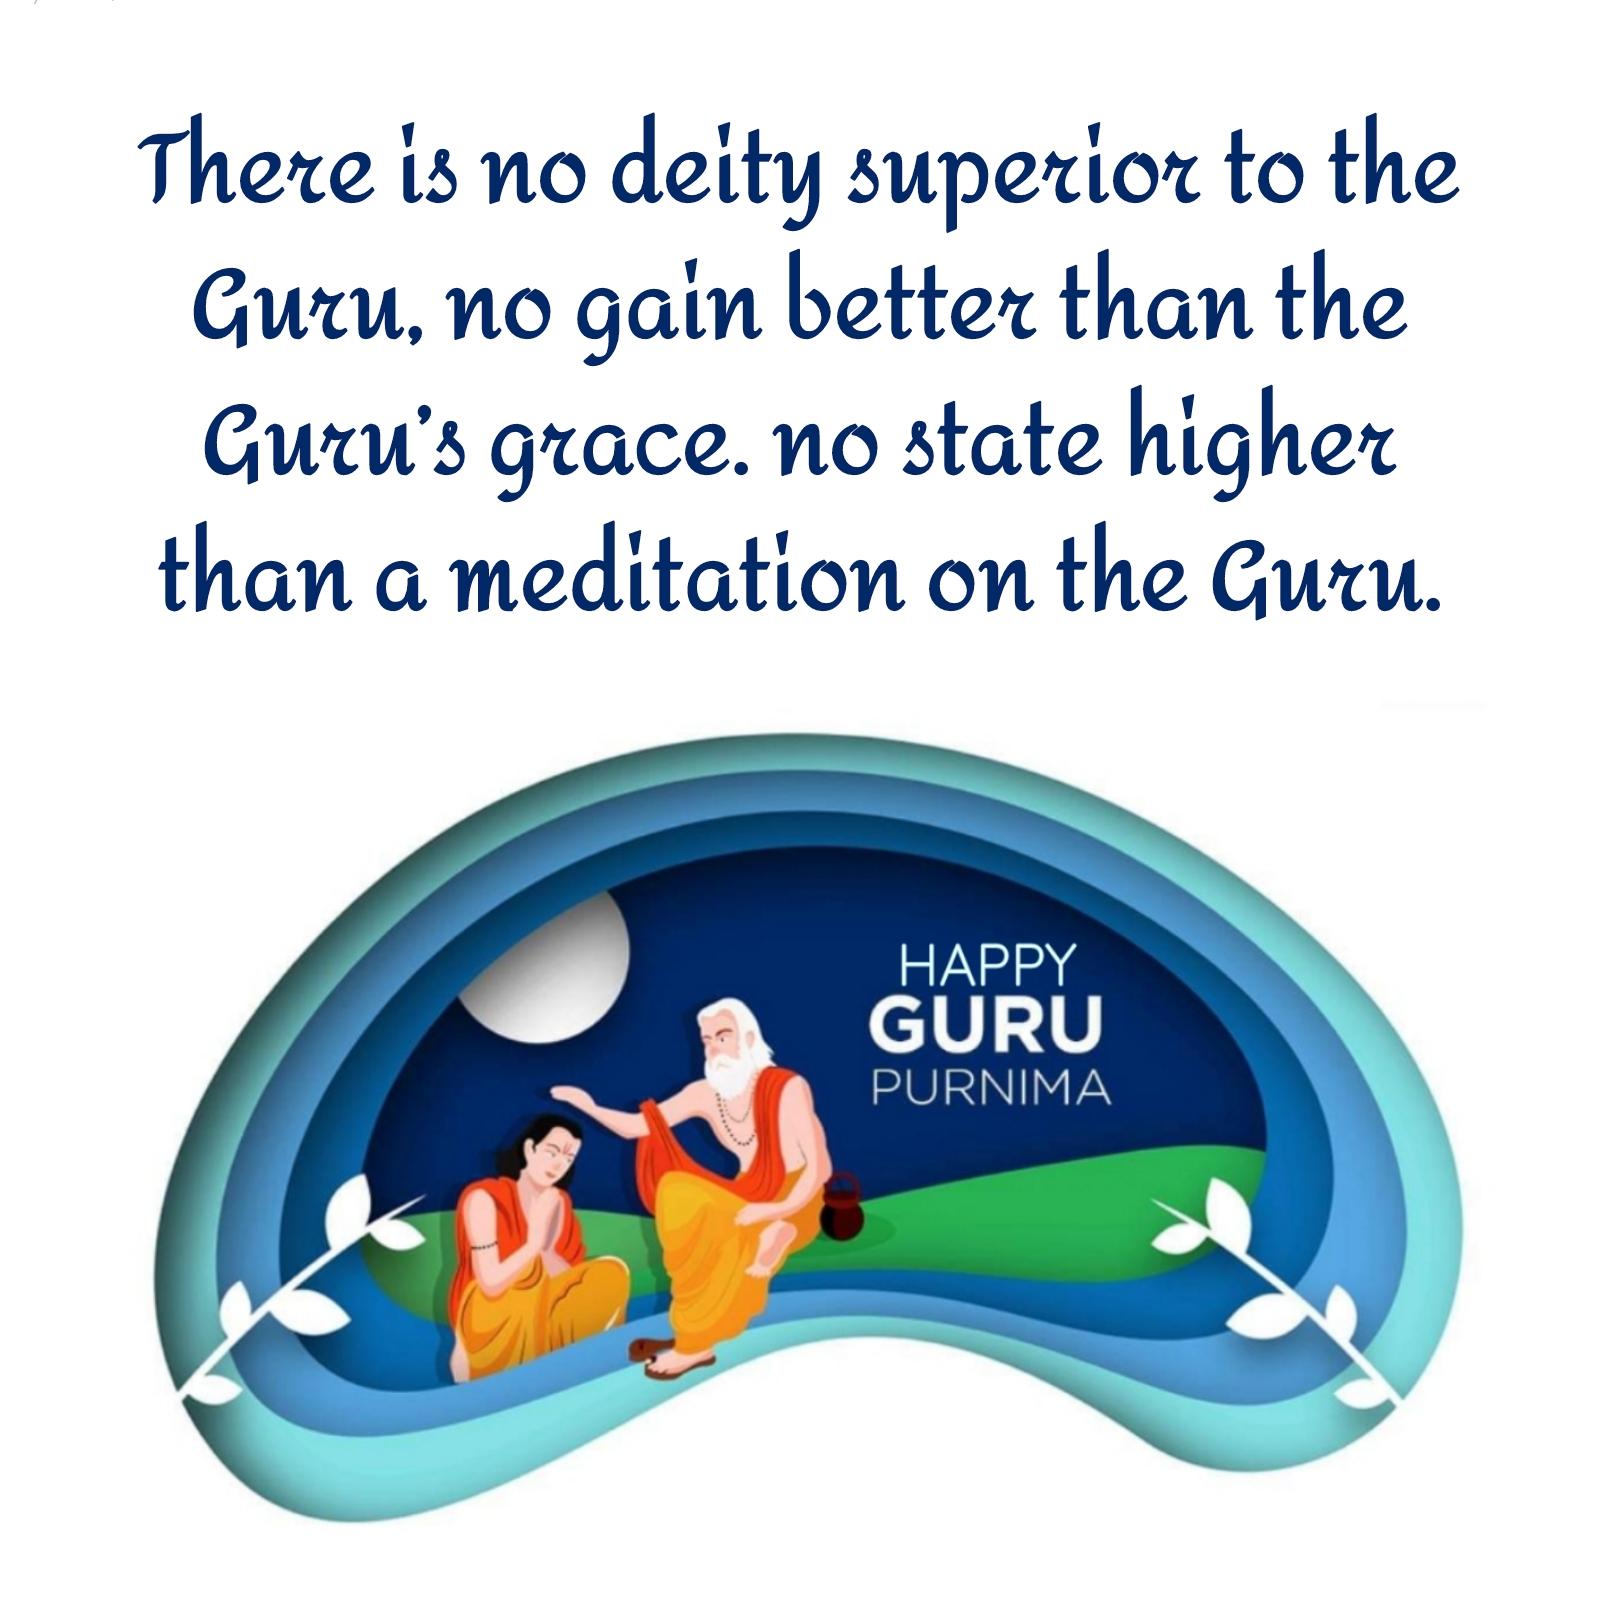 There is no deity superior to the Guru no gain better than the Gurus grace